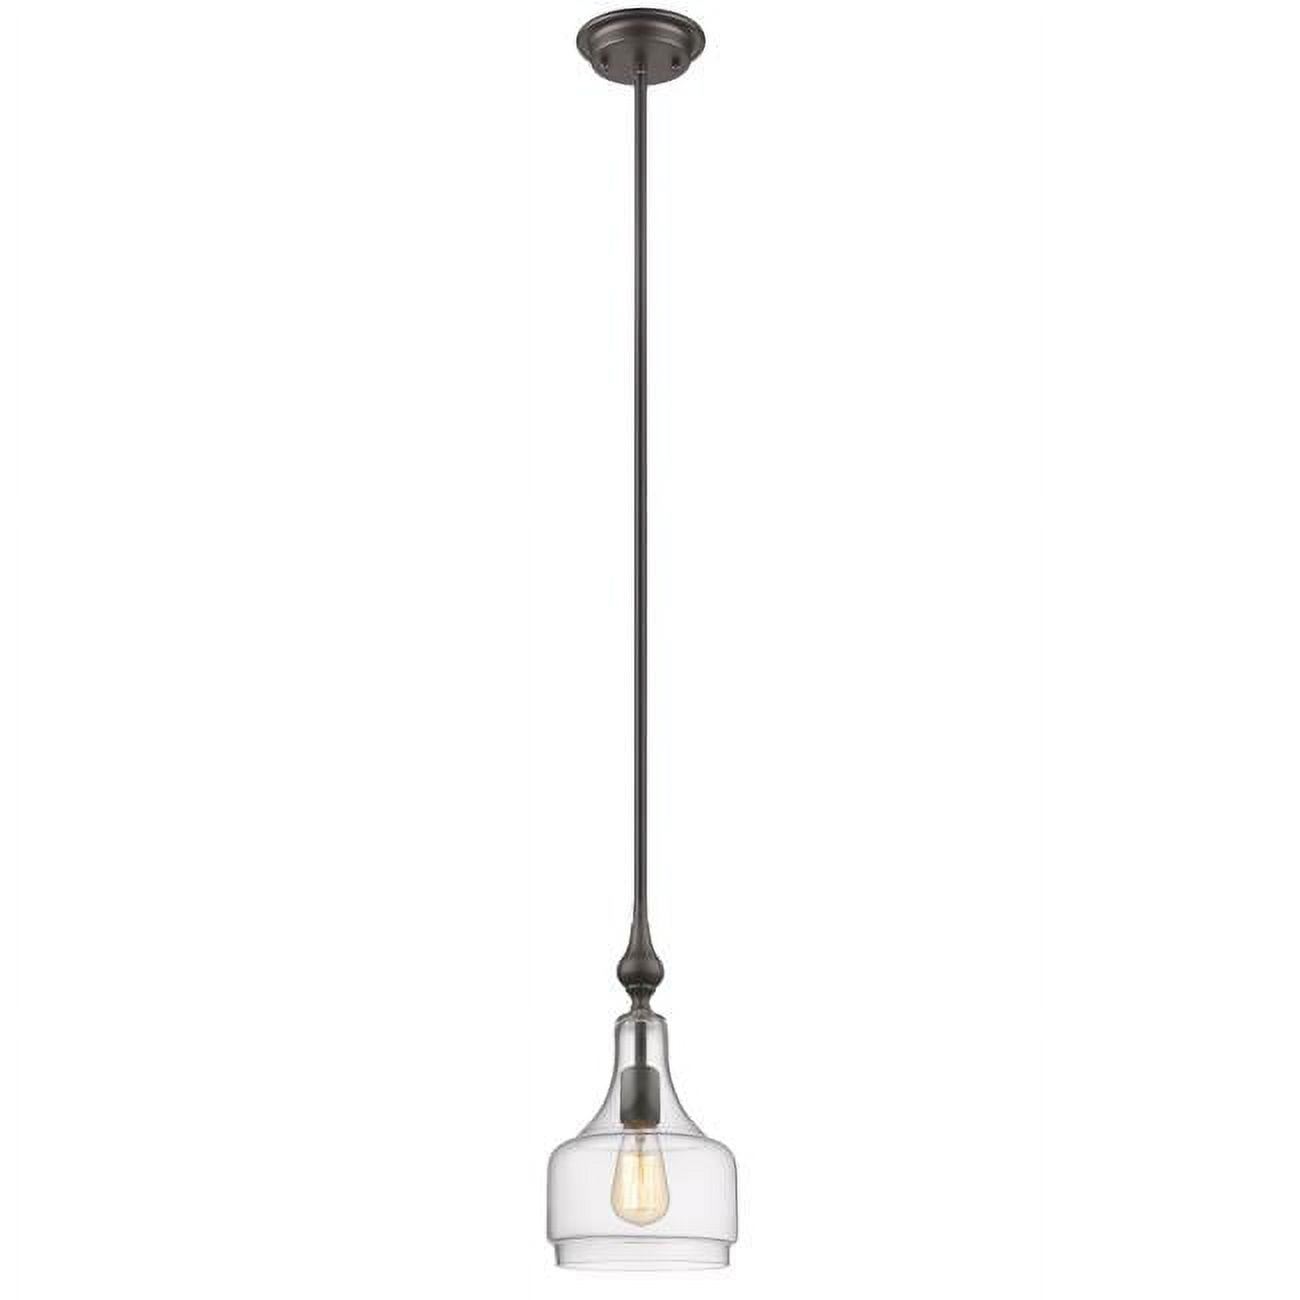 Ch2s007rb08-dp1 Layla Transitional 1 Light Rubbed Bronze Ceiling Mini Pendant - 8 In.